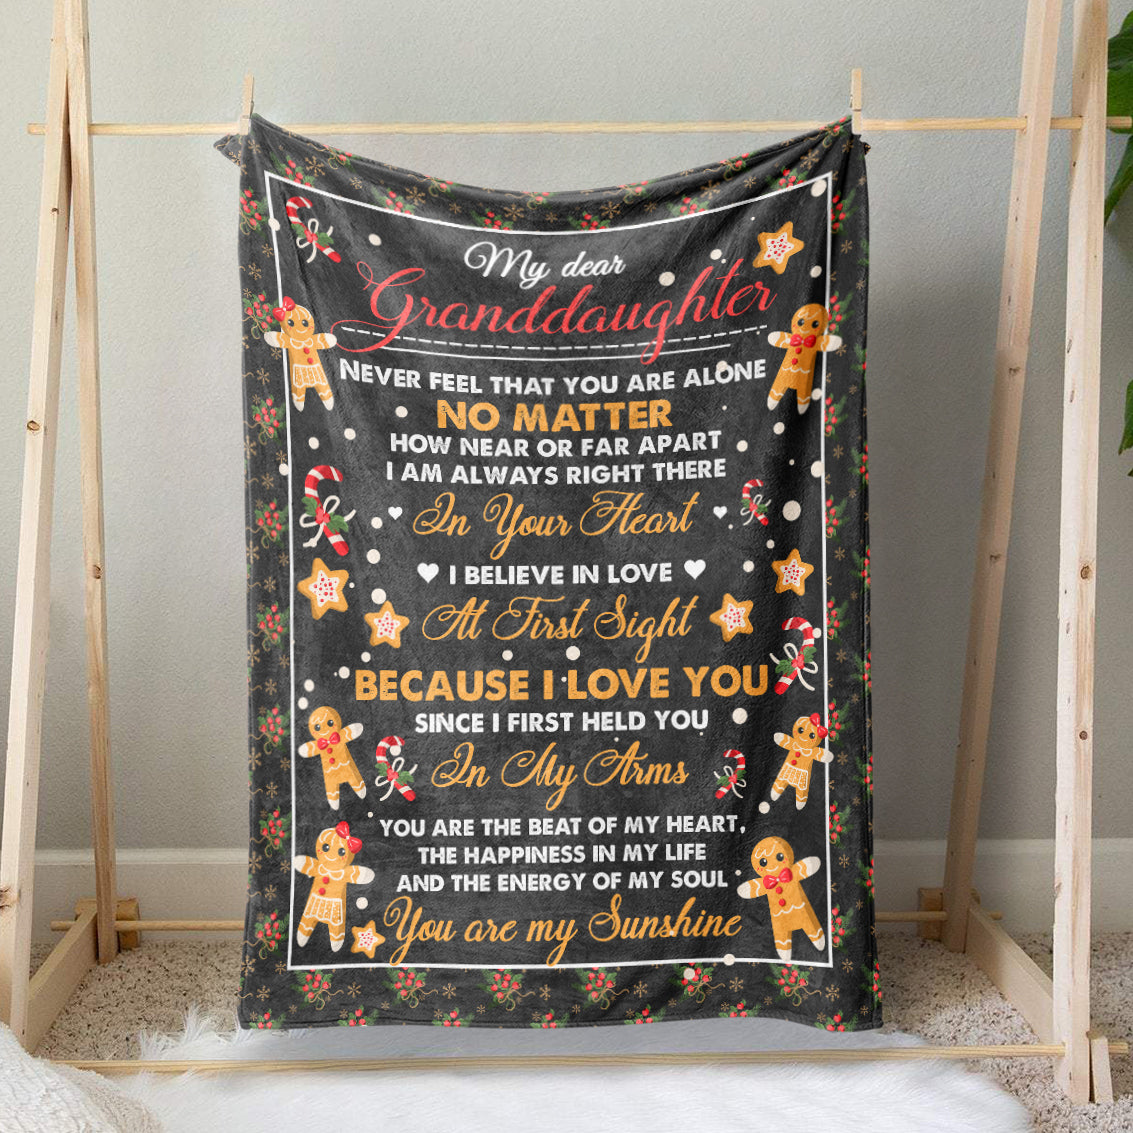 To My Dear Granddaughter Christmas Blanket, Never Feel That You Are Alone, I Am in You Heart Blanket, Christmas Gift Ideas for Granddaughter